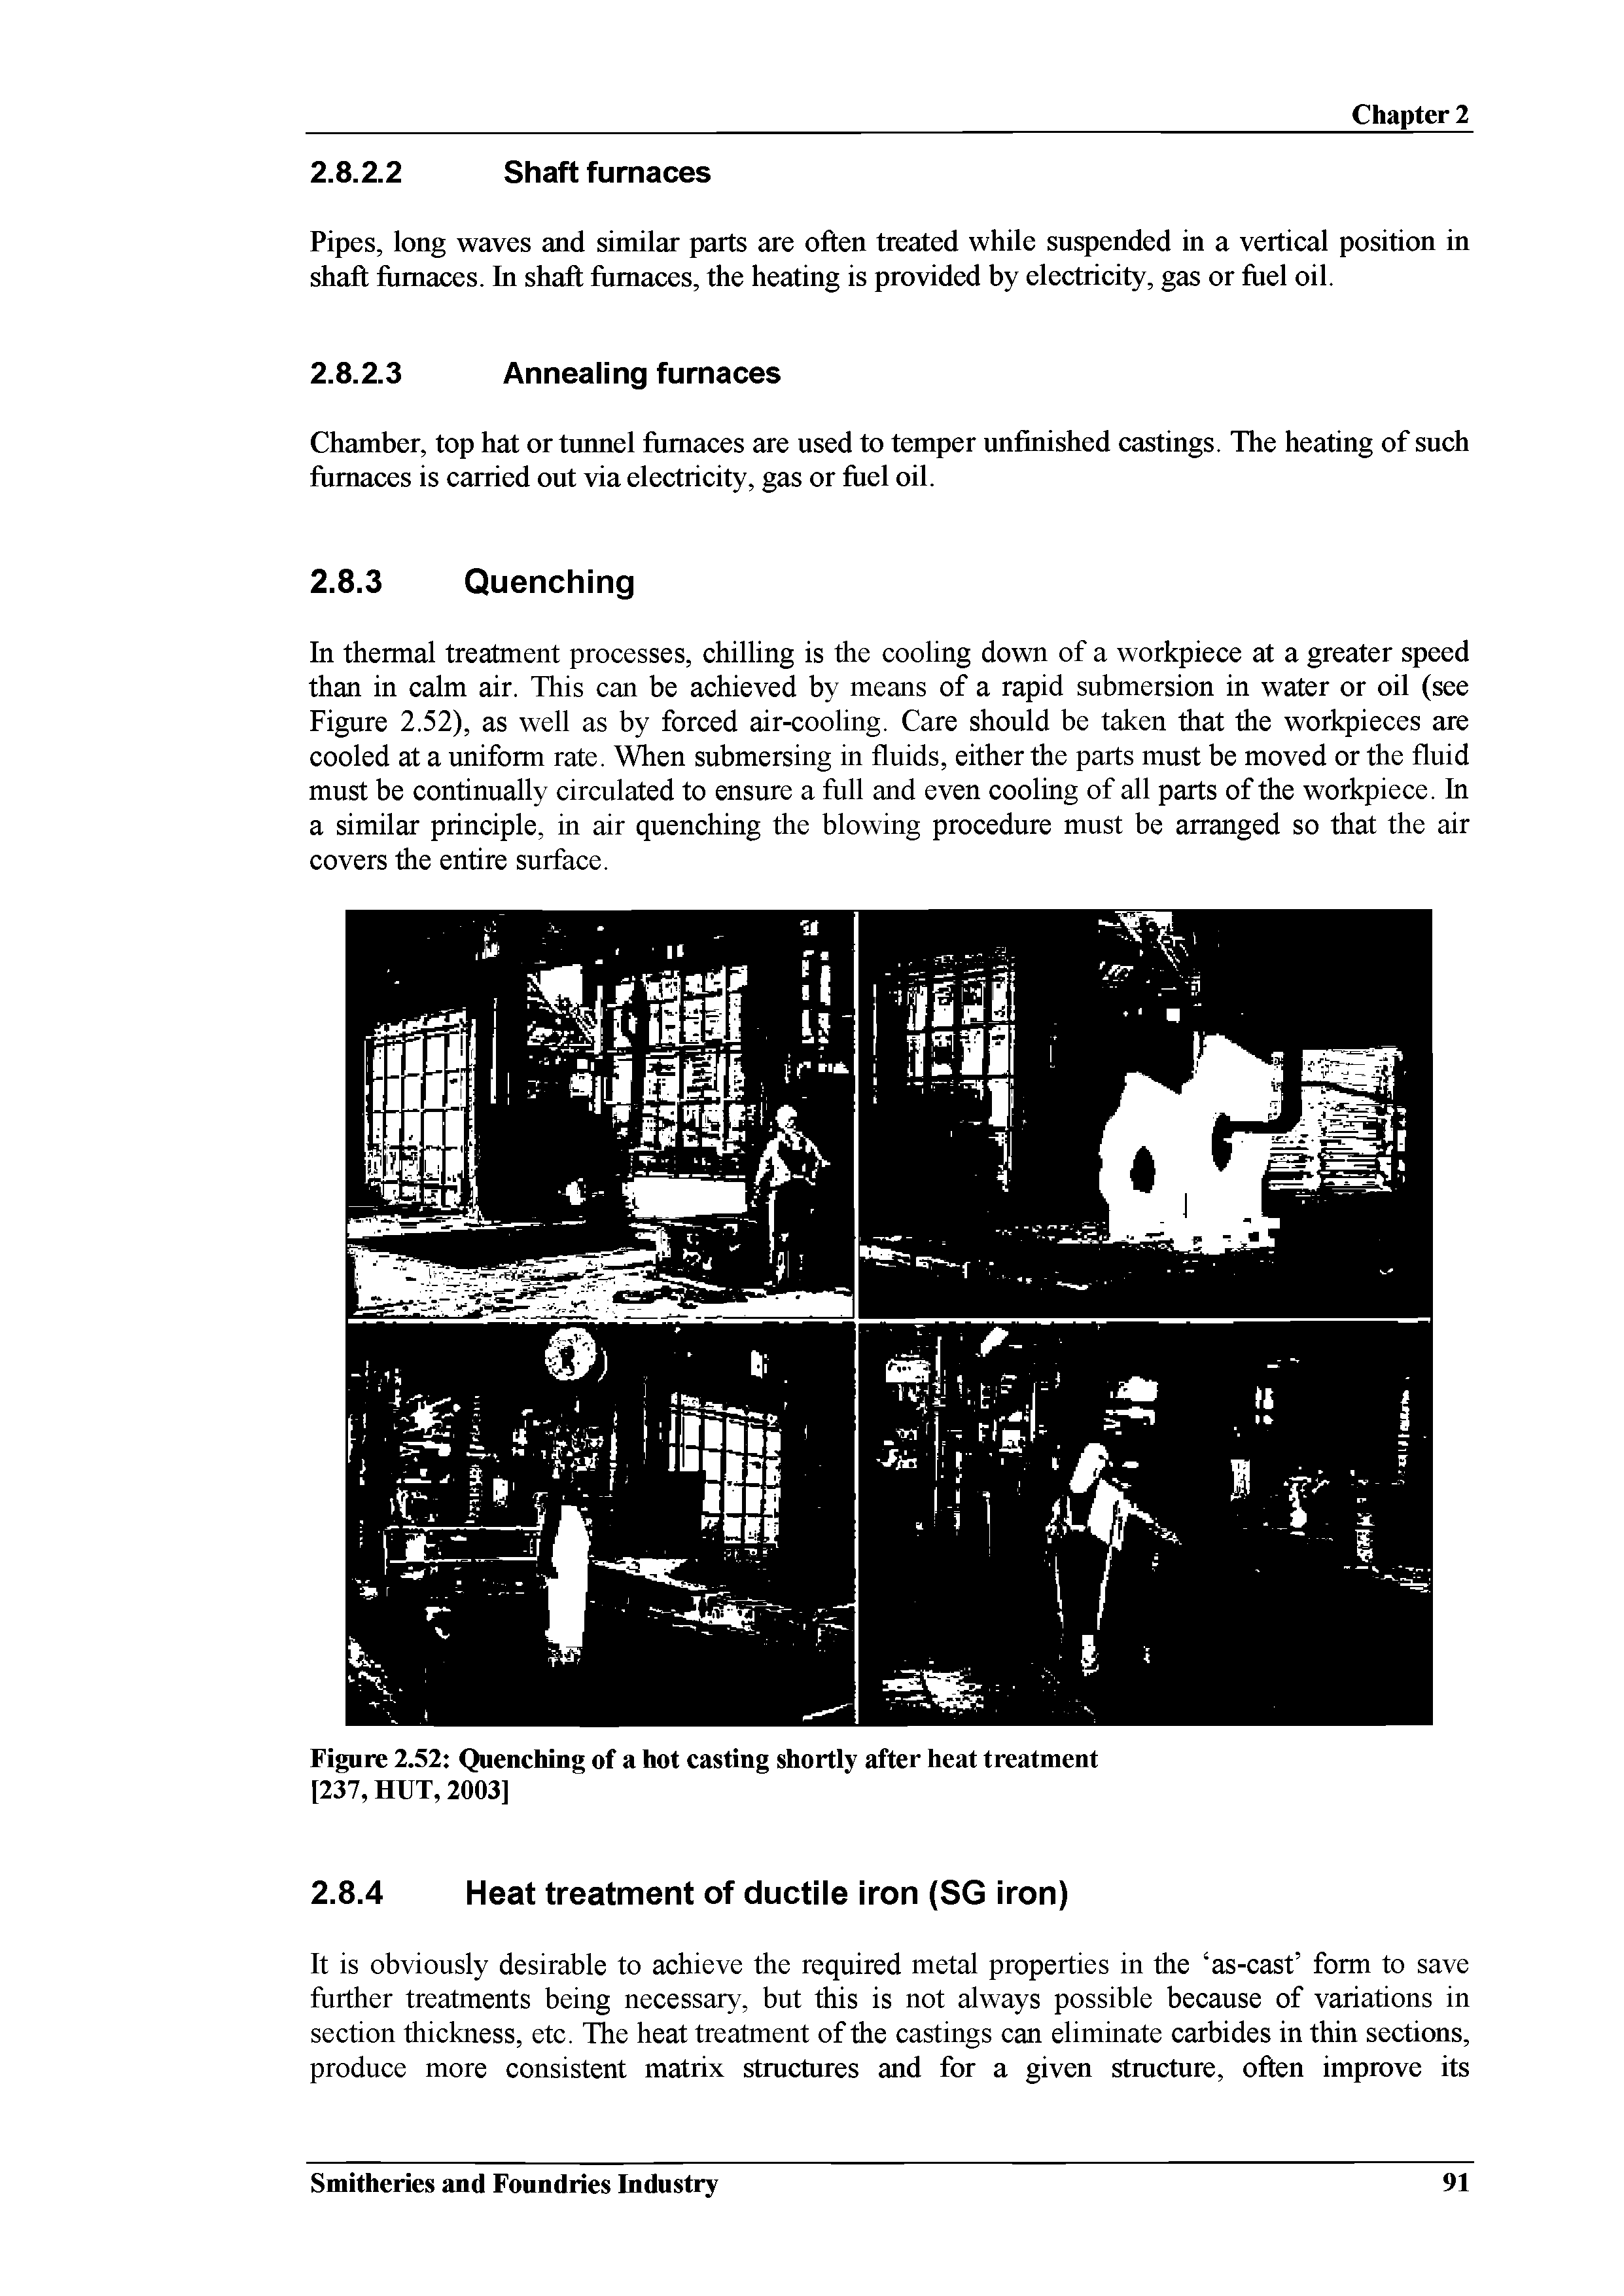 Figure 2.52 Quenching of a hot casting shortly after heat treatment [237, HUT, 2003]...